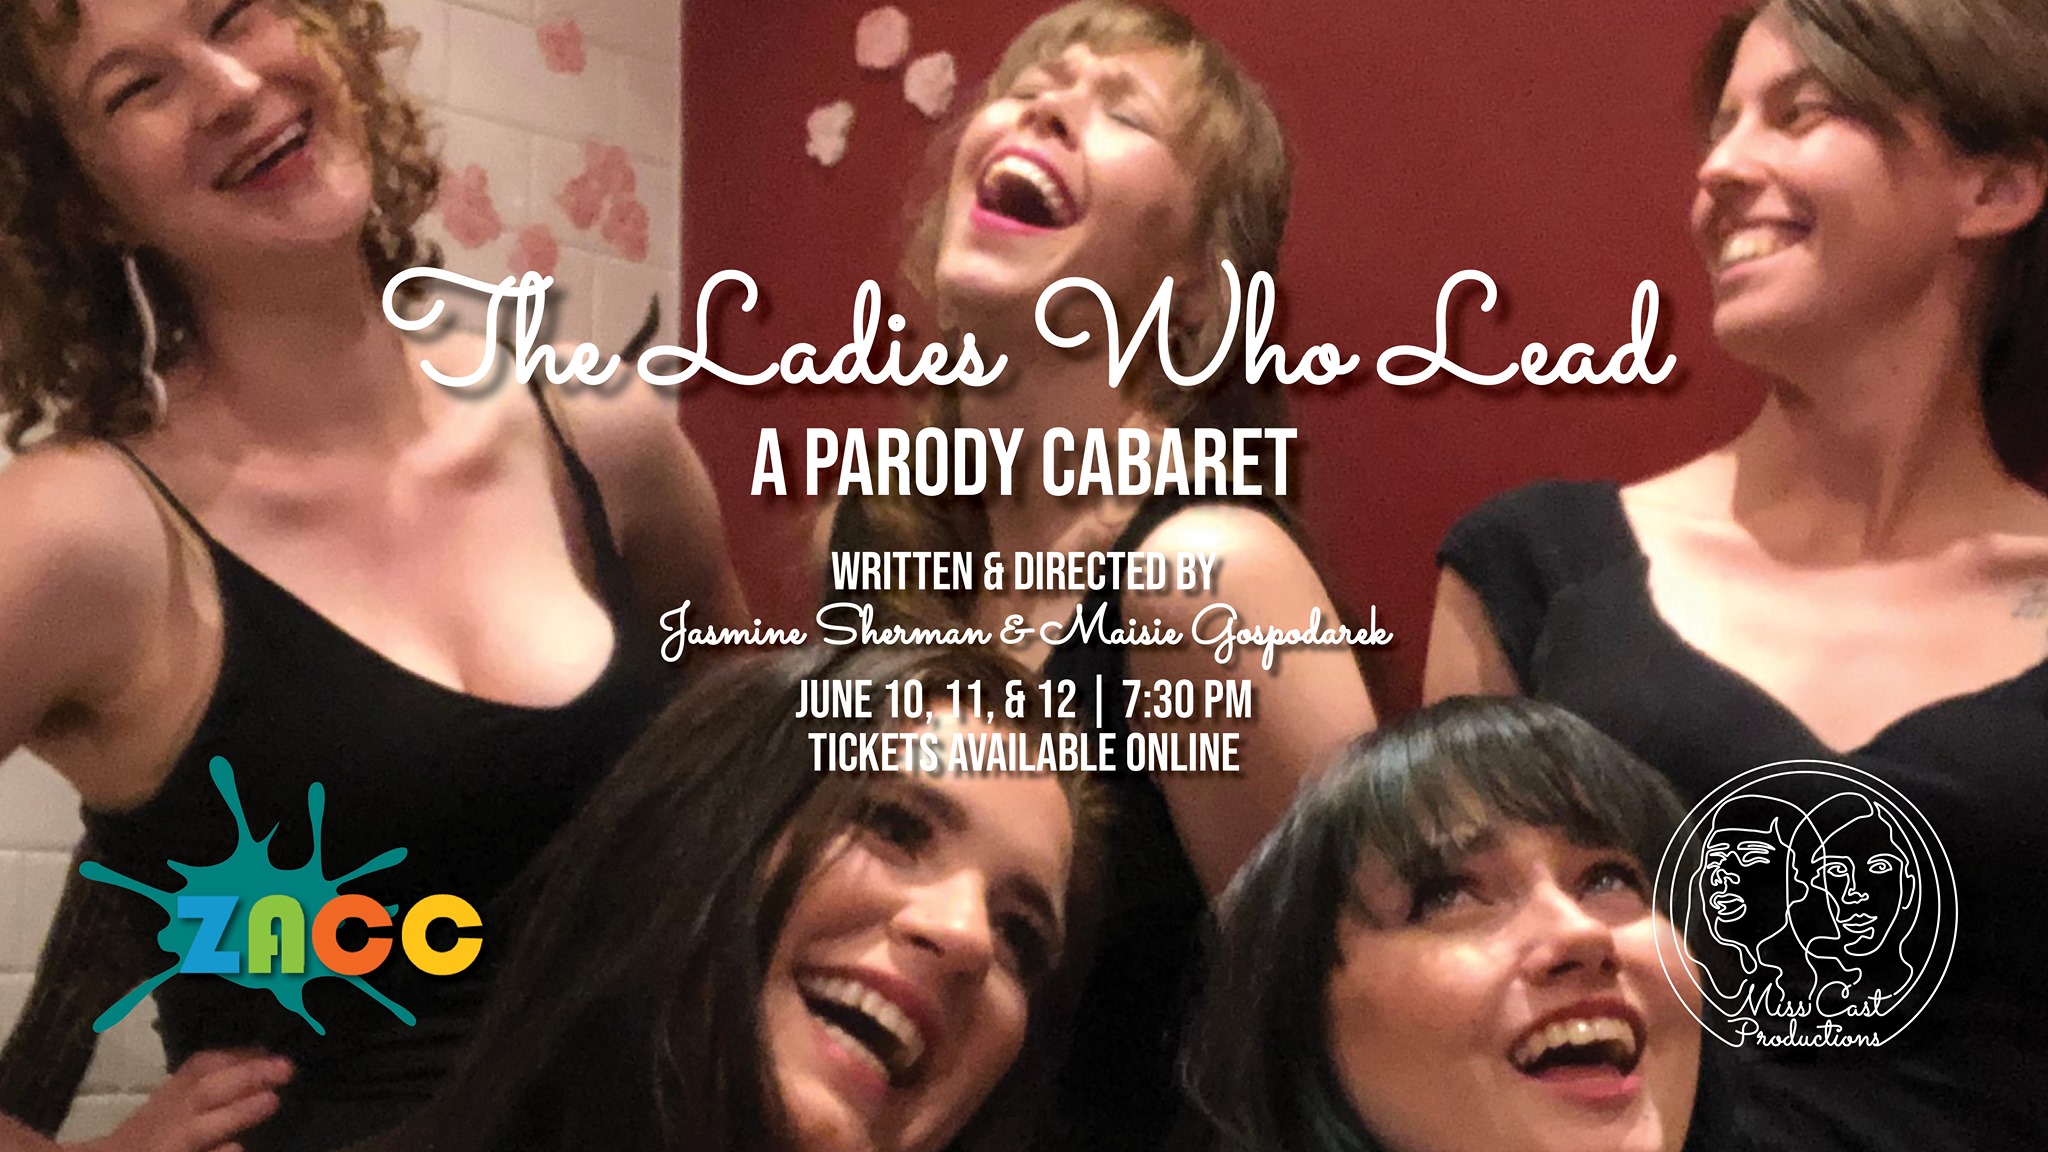 The Ladies Who Lead: A Parody Cabaret